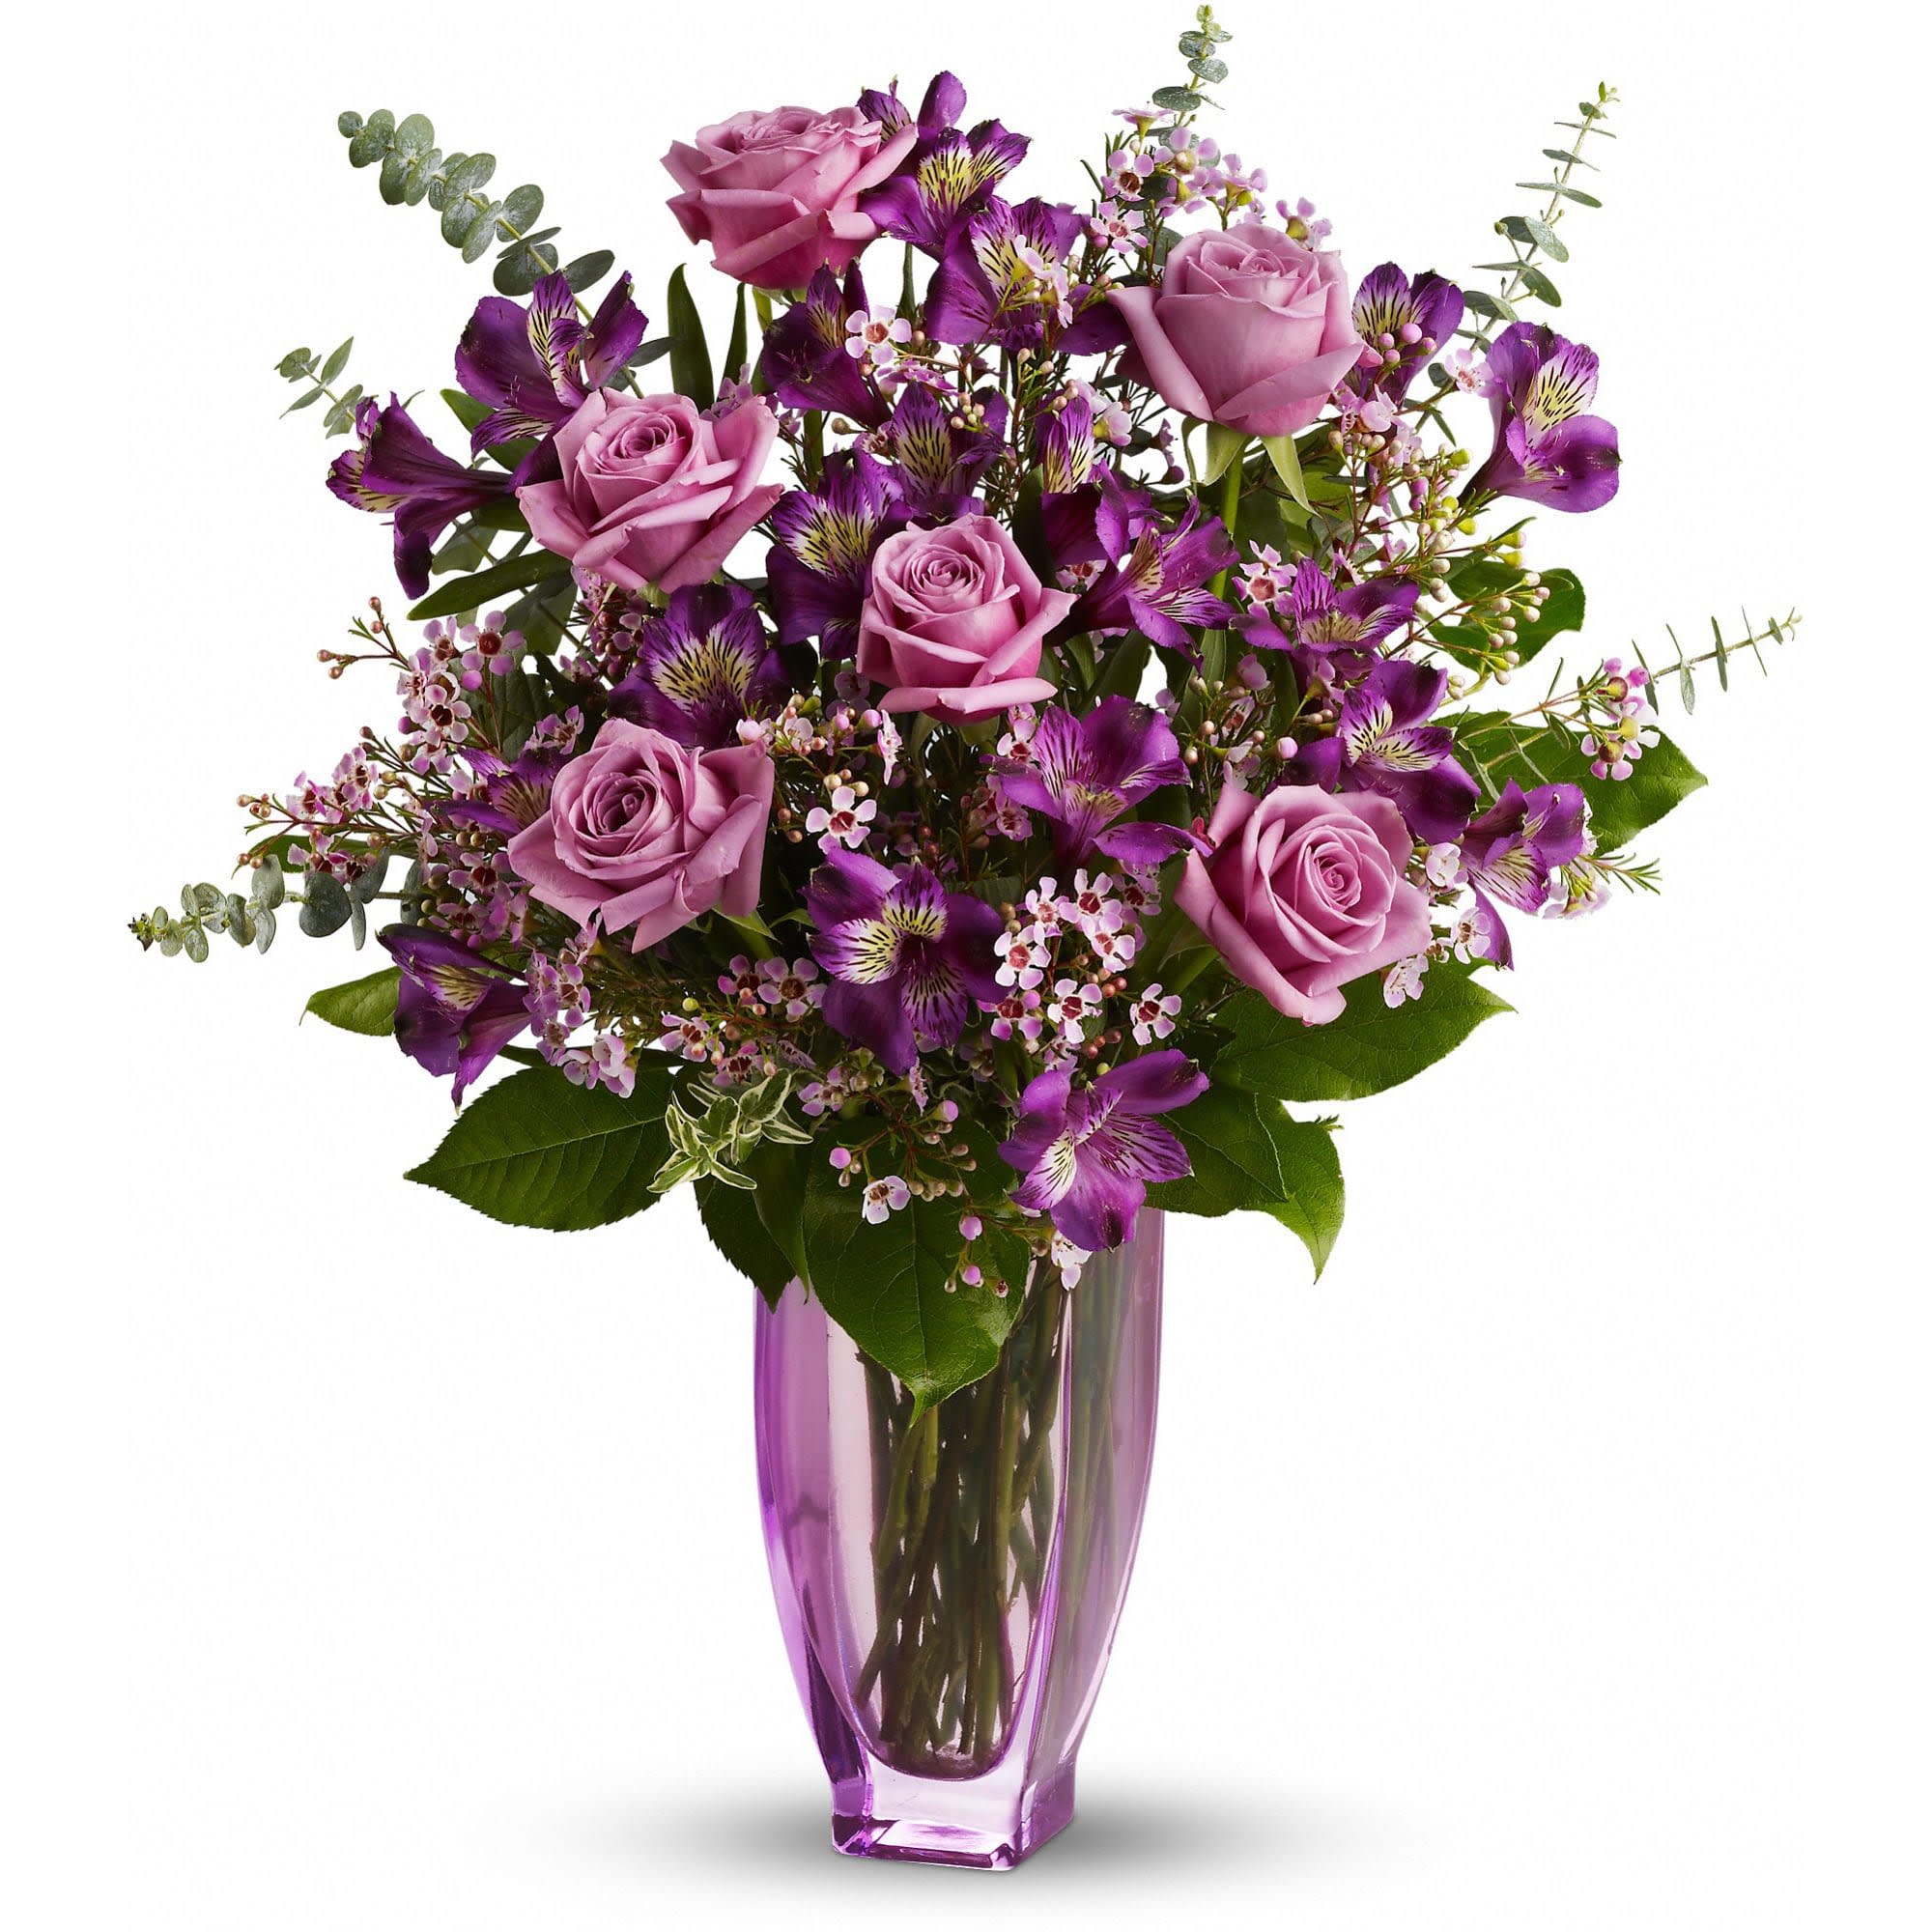 Teleflora's Dream of Roses - This gorgeous bouquet, aptly named for its light and delicately arranged blooms, features the most luscious lavender roses imaginable. Artistically arranged in a pale lavender vase, the mix of flowers is breathtaking. 